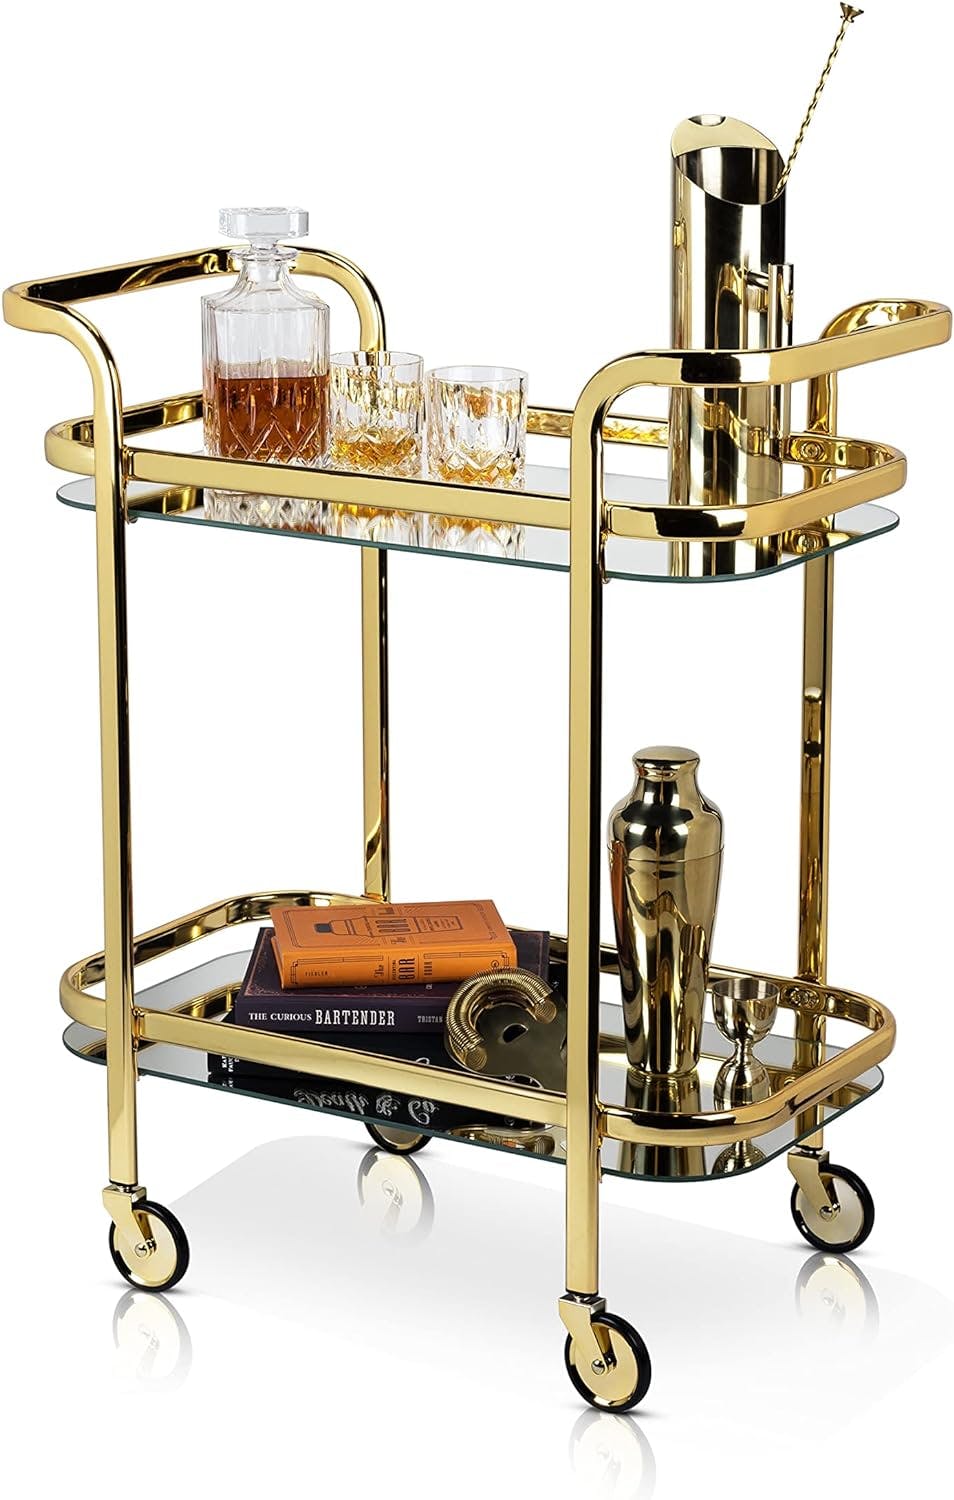 Belmont Polished Gold Stainless Steel Bar Cart with Glass Shelves